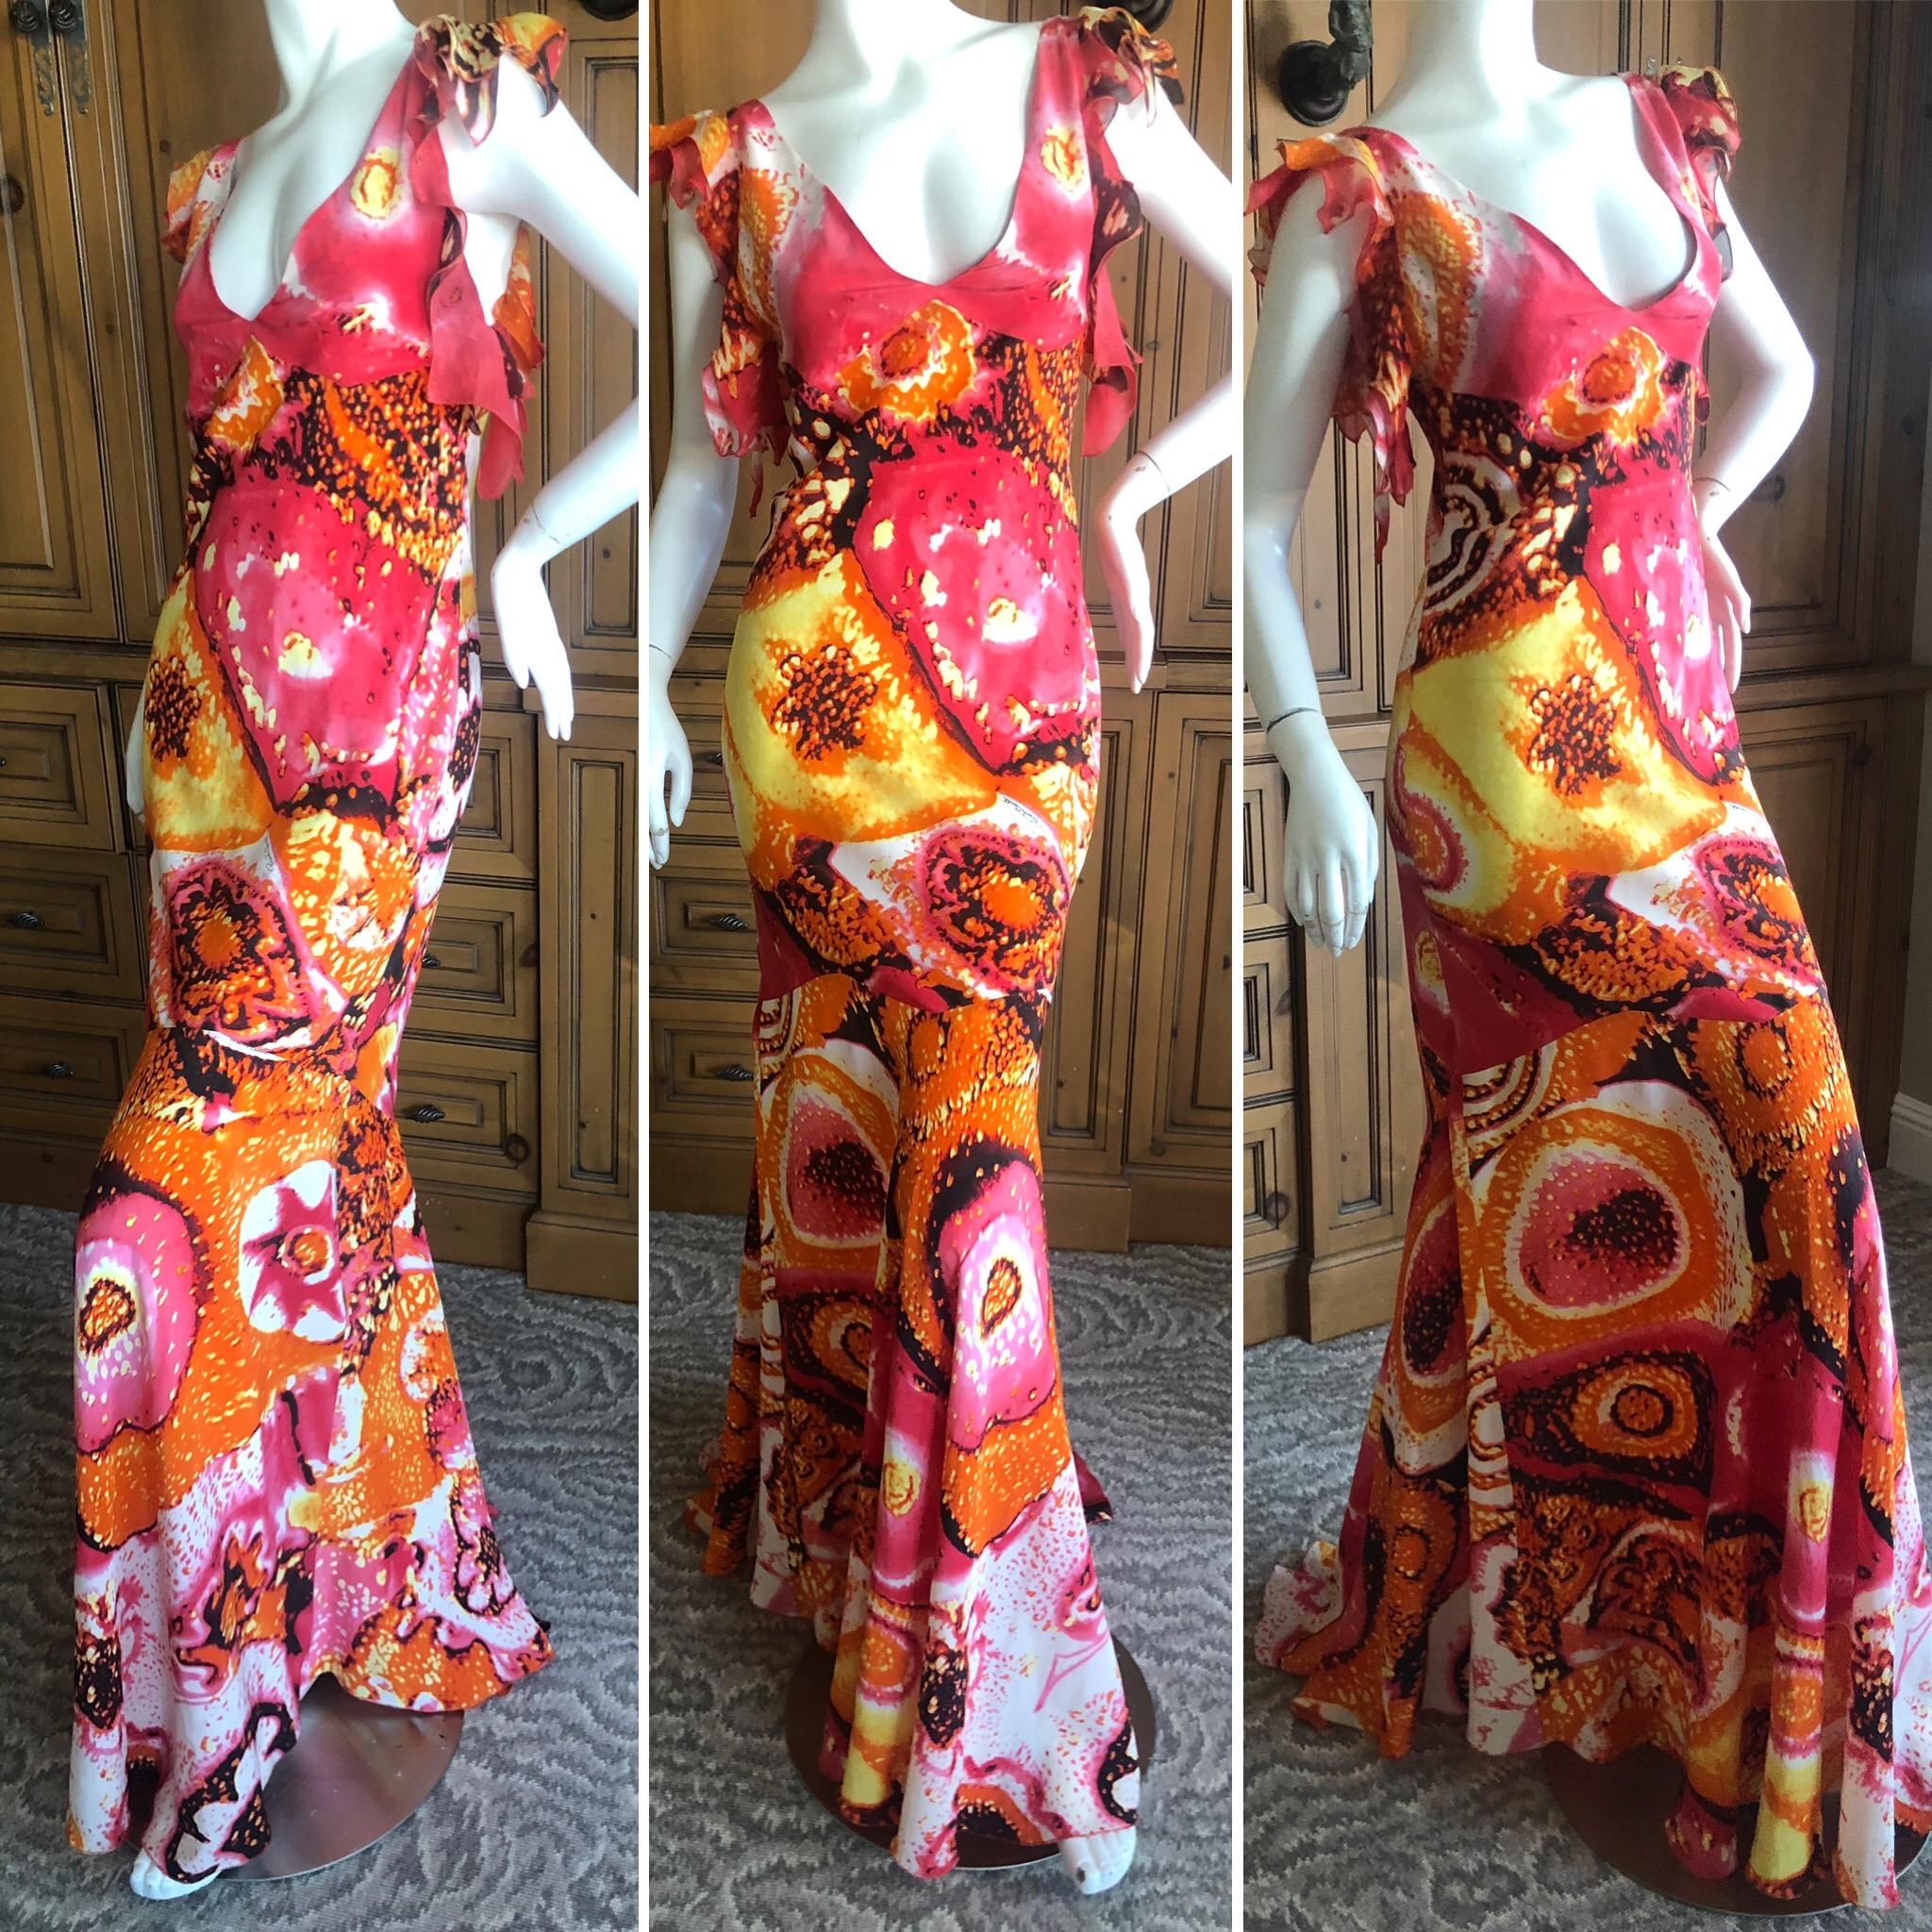 Roberto Cavalli Vintage 1980's Acid Bright Bias Cut Evening Dress
  Size S, there is a lot of stretch
Bust 34